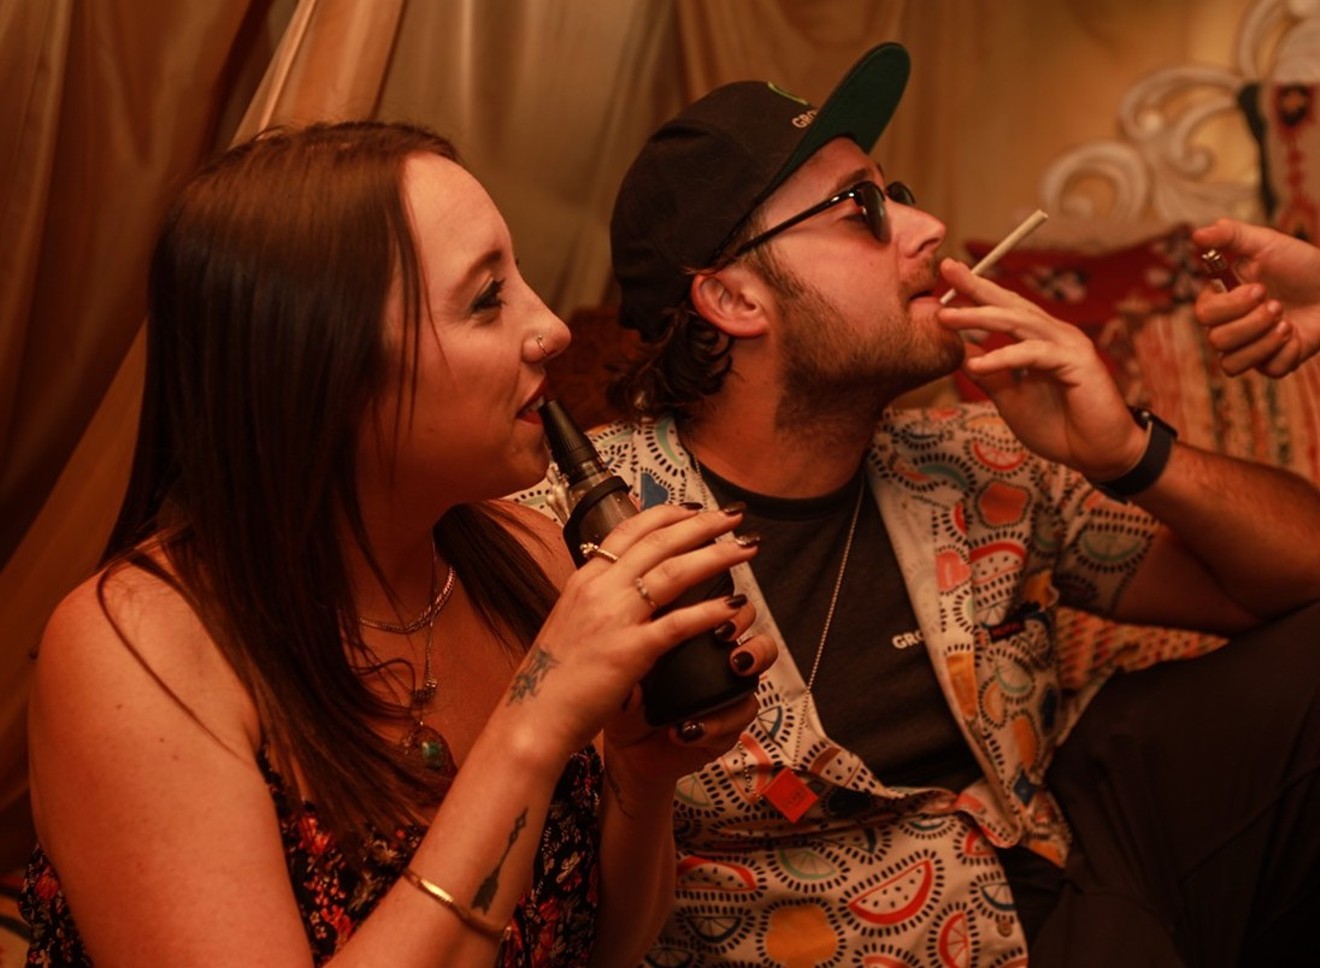 Cannabis-friendly events are still largely behind closed doors in Colorado.